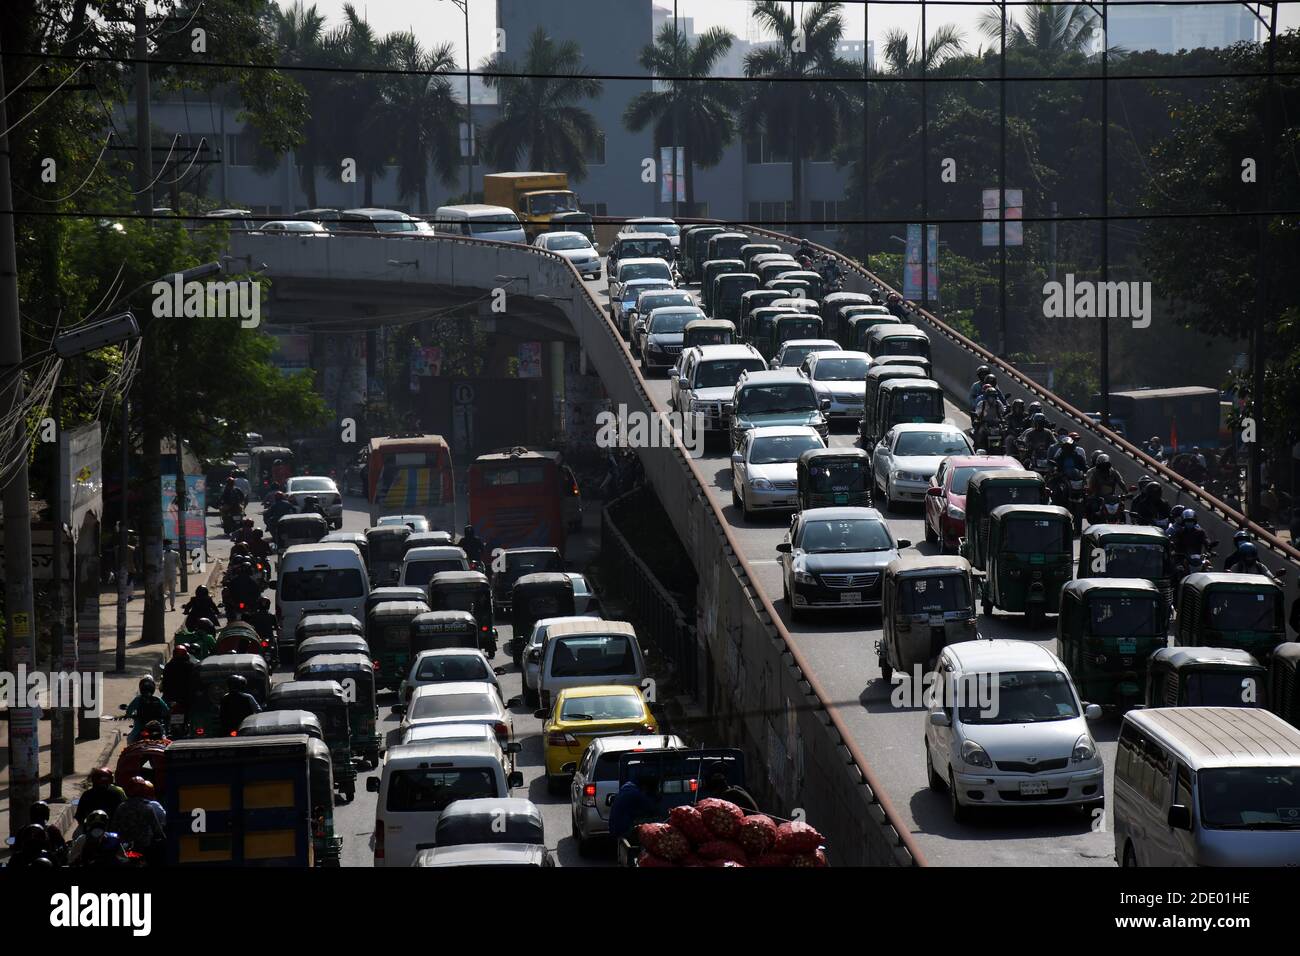 DHAKA, BANGLADESH – 26 November 2020: Traffic overcrowding on the fly over and road at Tejgaon area in Dhaka. Traffic jams are prone in Dhaka, affecti Stock Photo